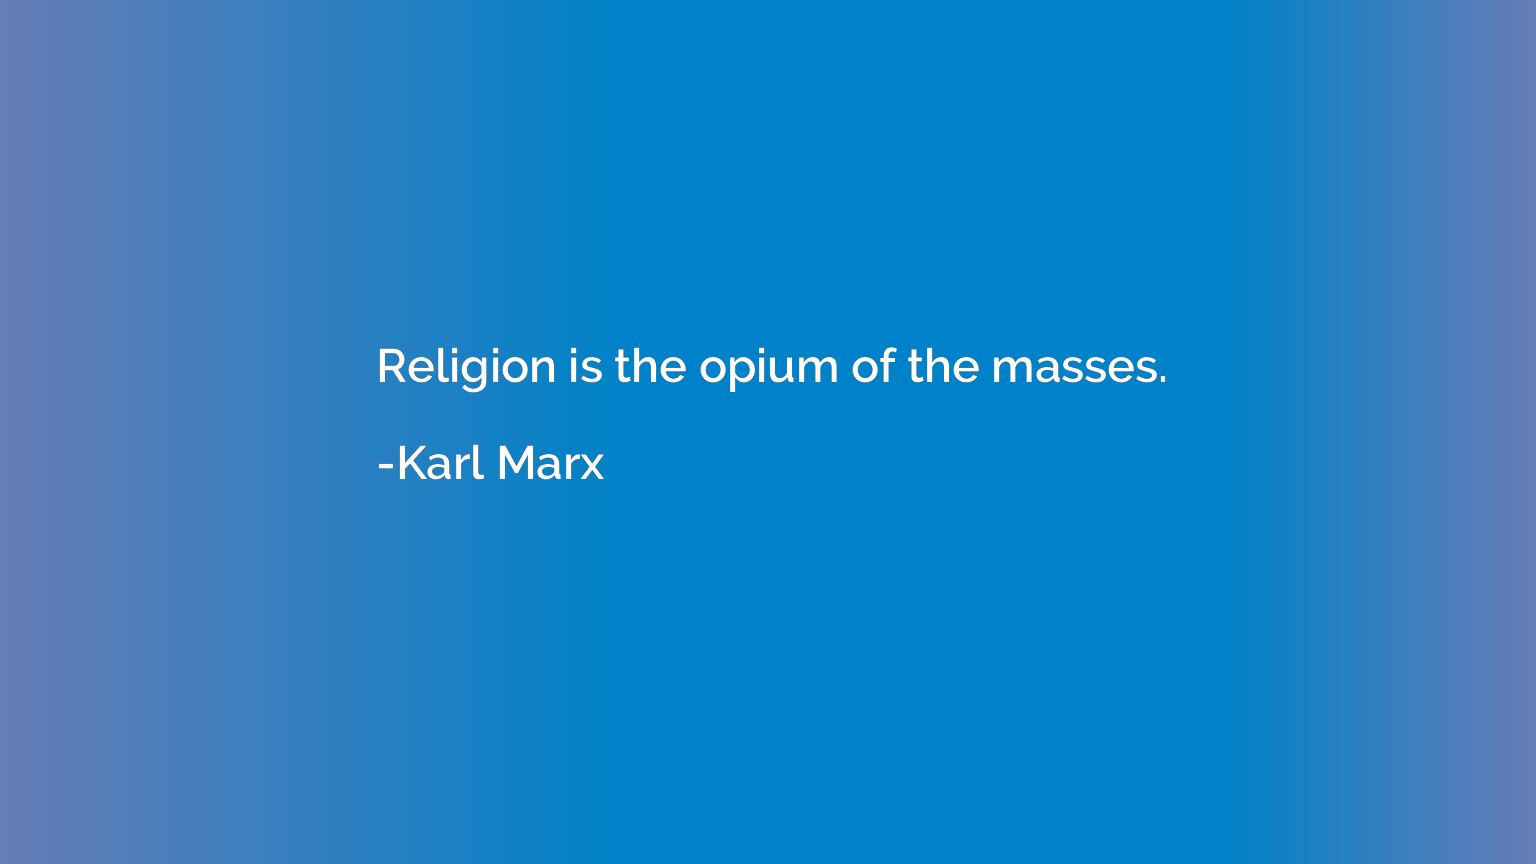 Religion is the opium of the masses.